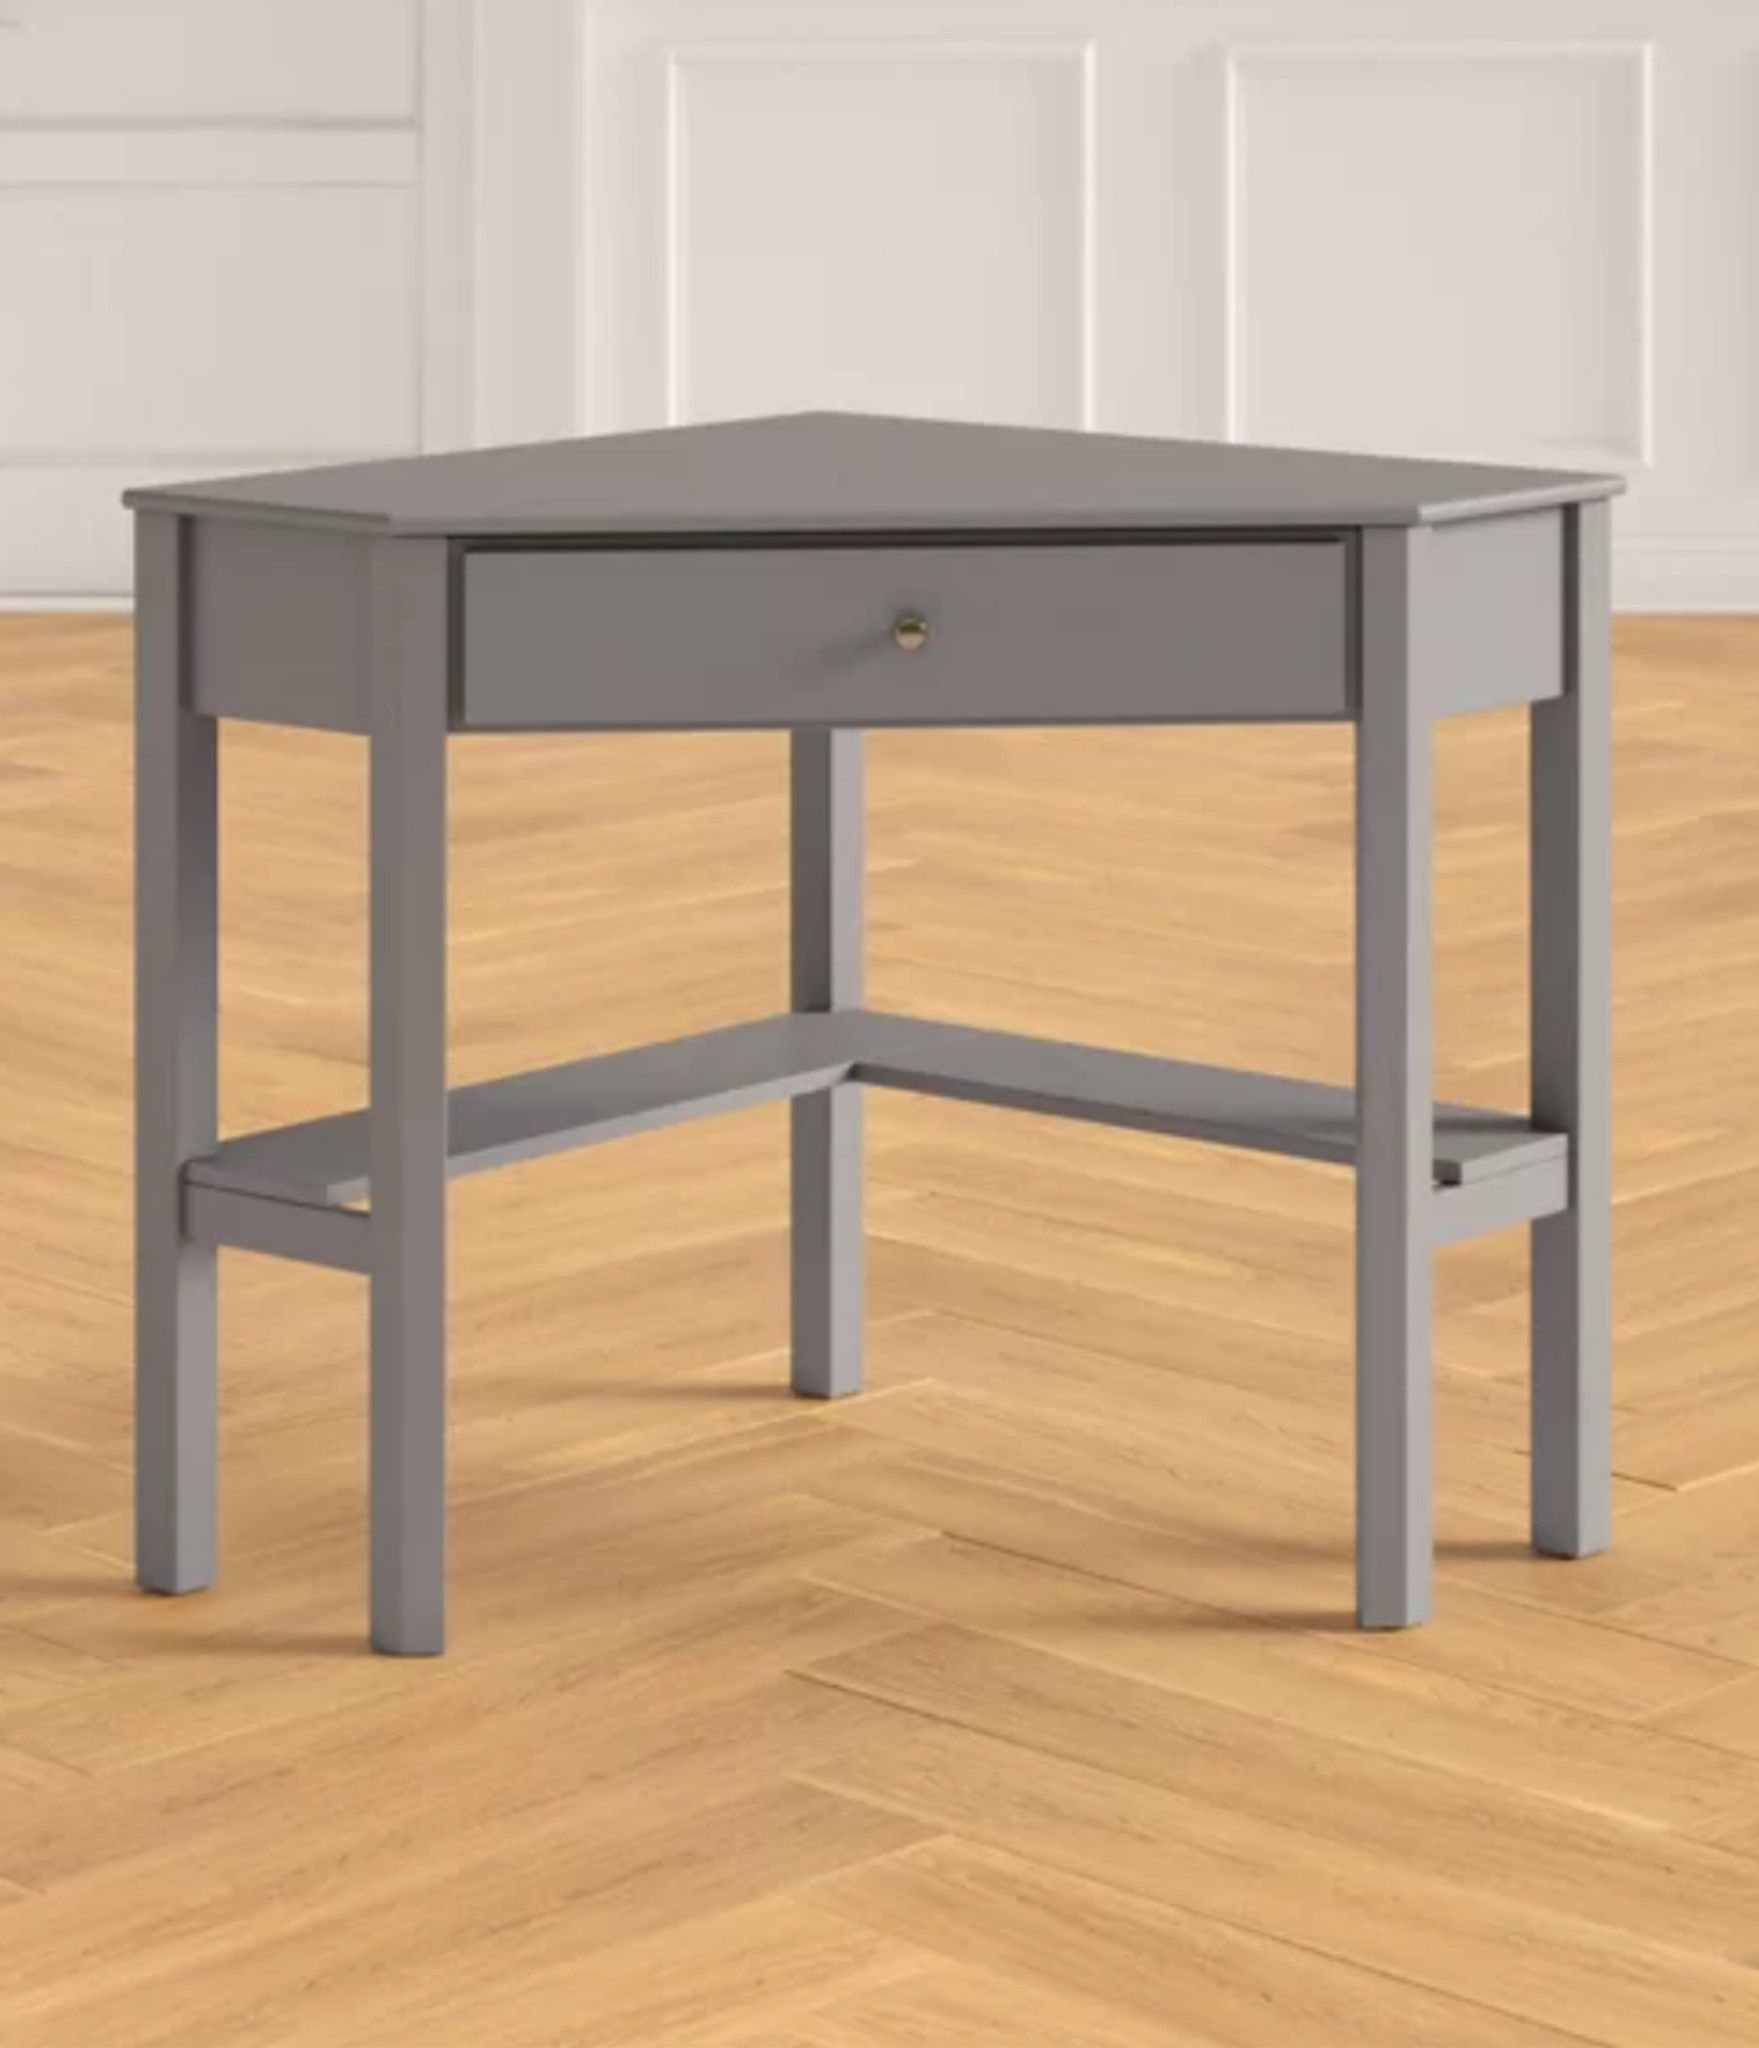 Brand new - wood corner desk in grey - with drawer and shelf